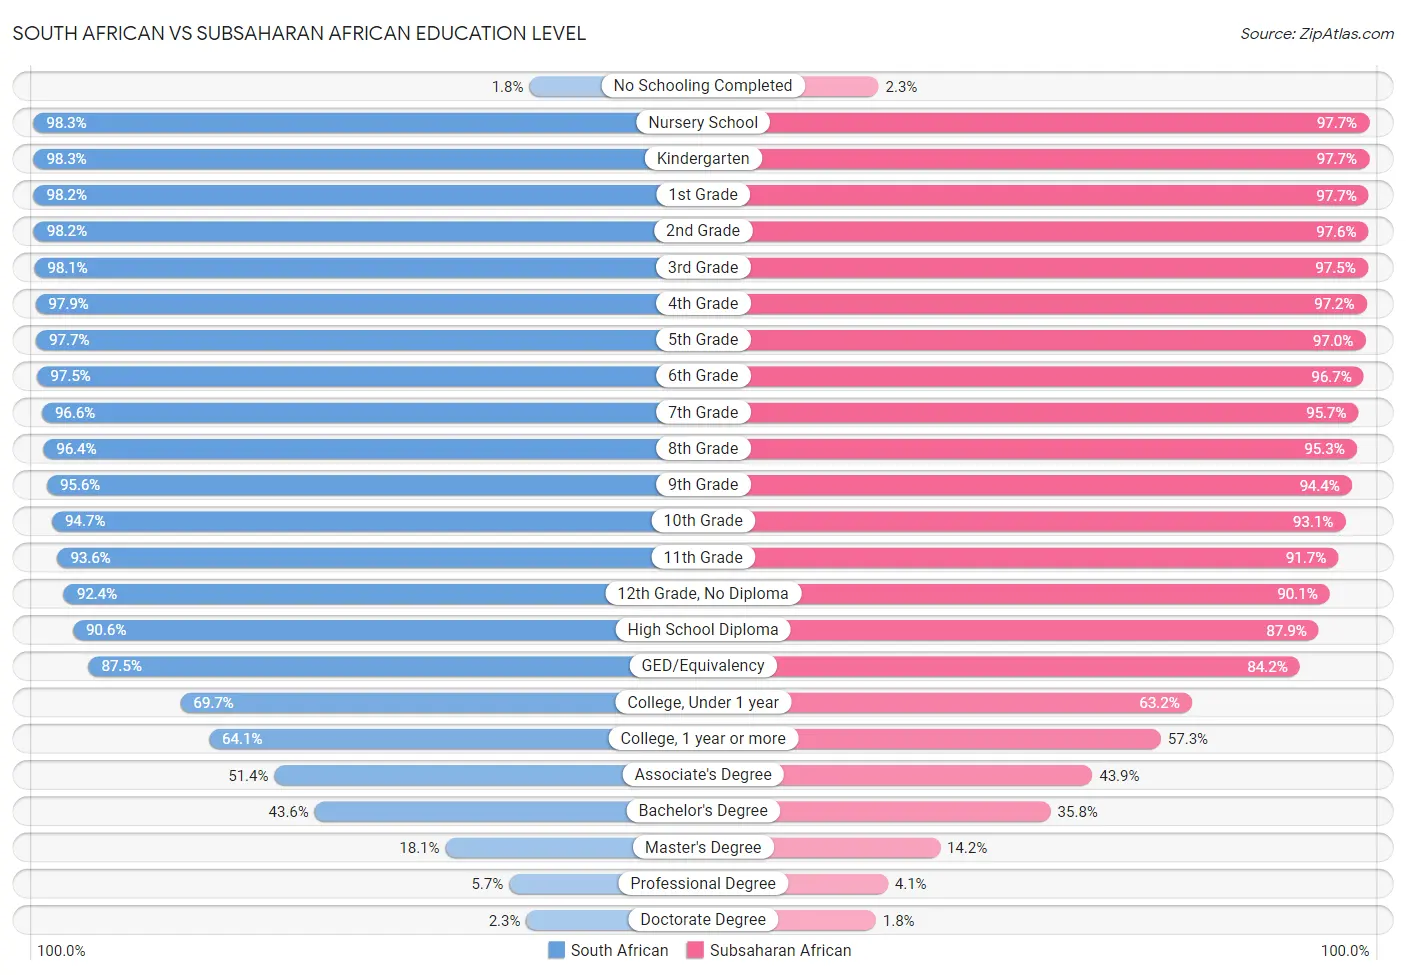 South African vs Subsaharan African Education Level